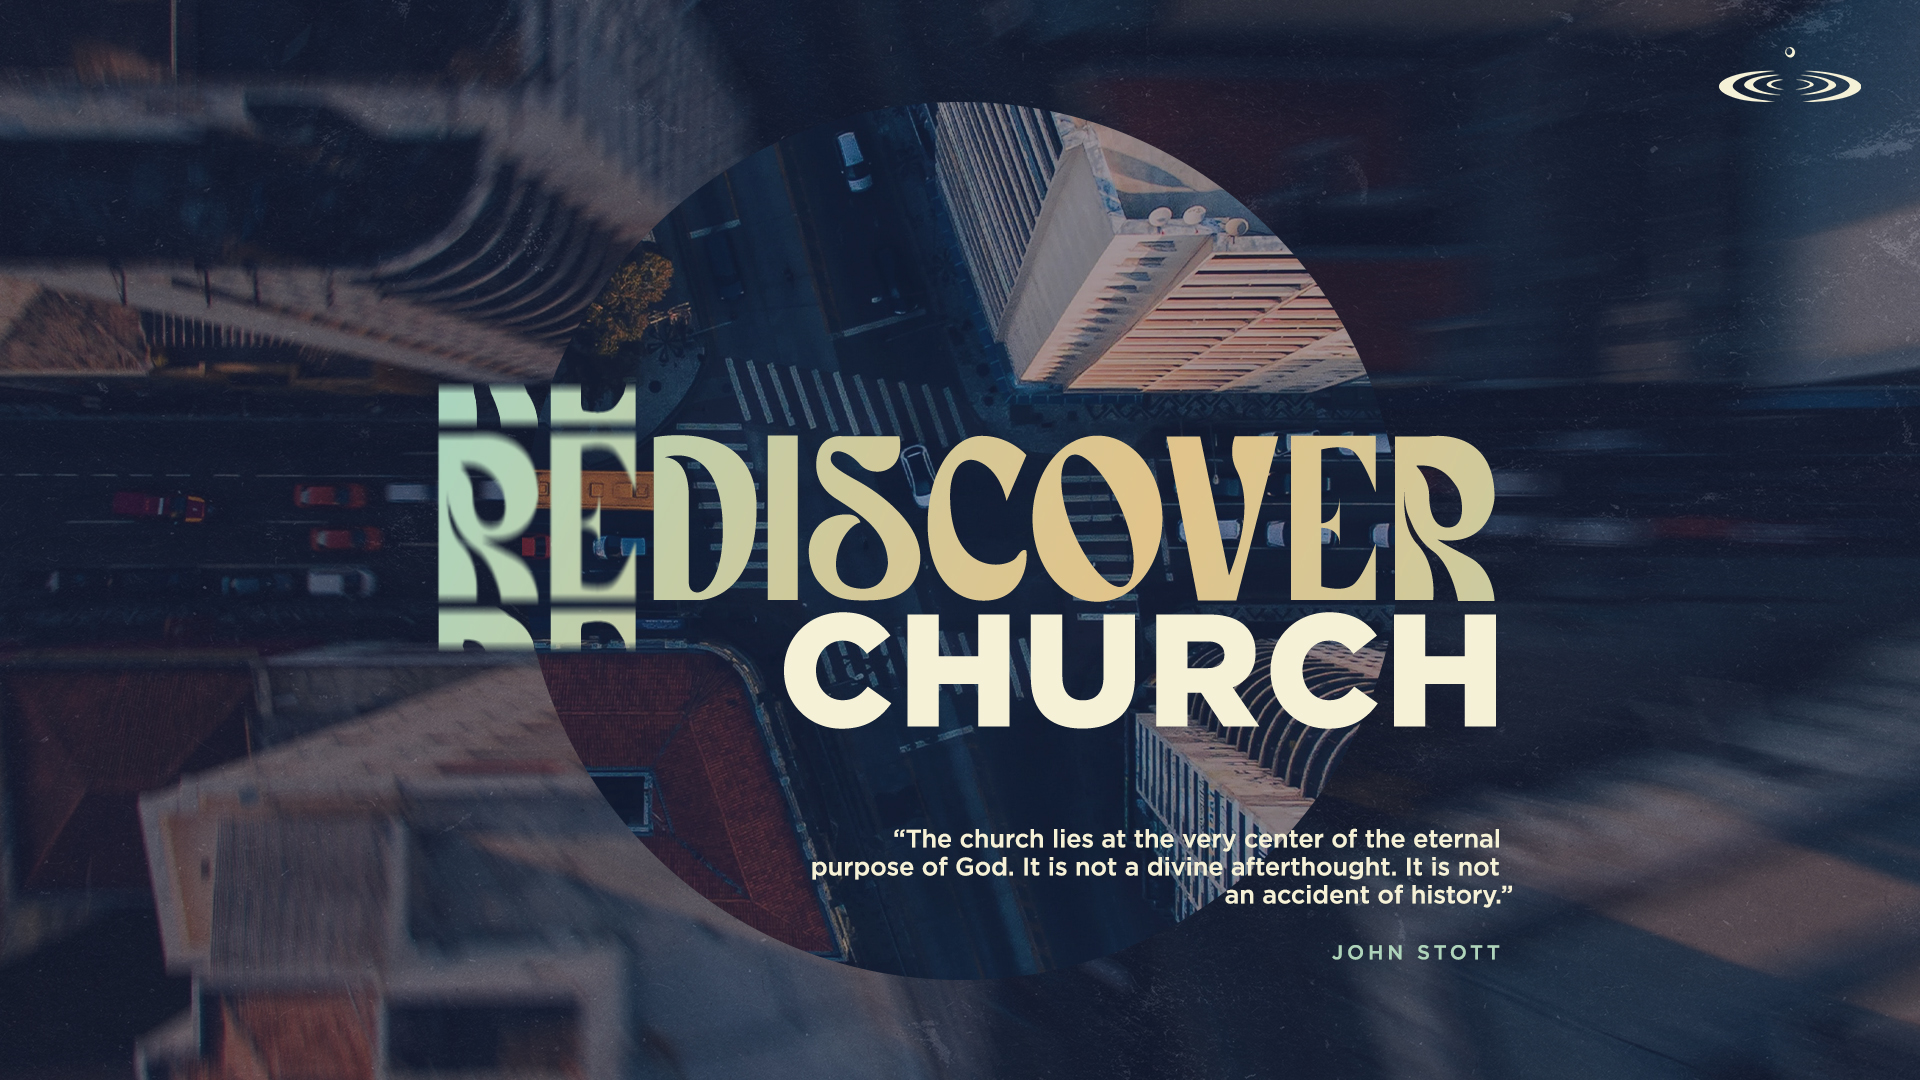 Rediscover Church, Part 1: “The Church Gathered”